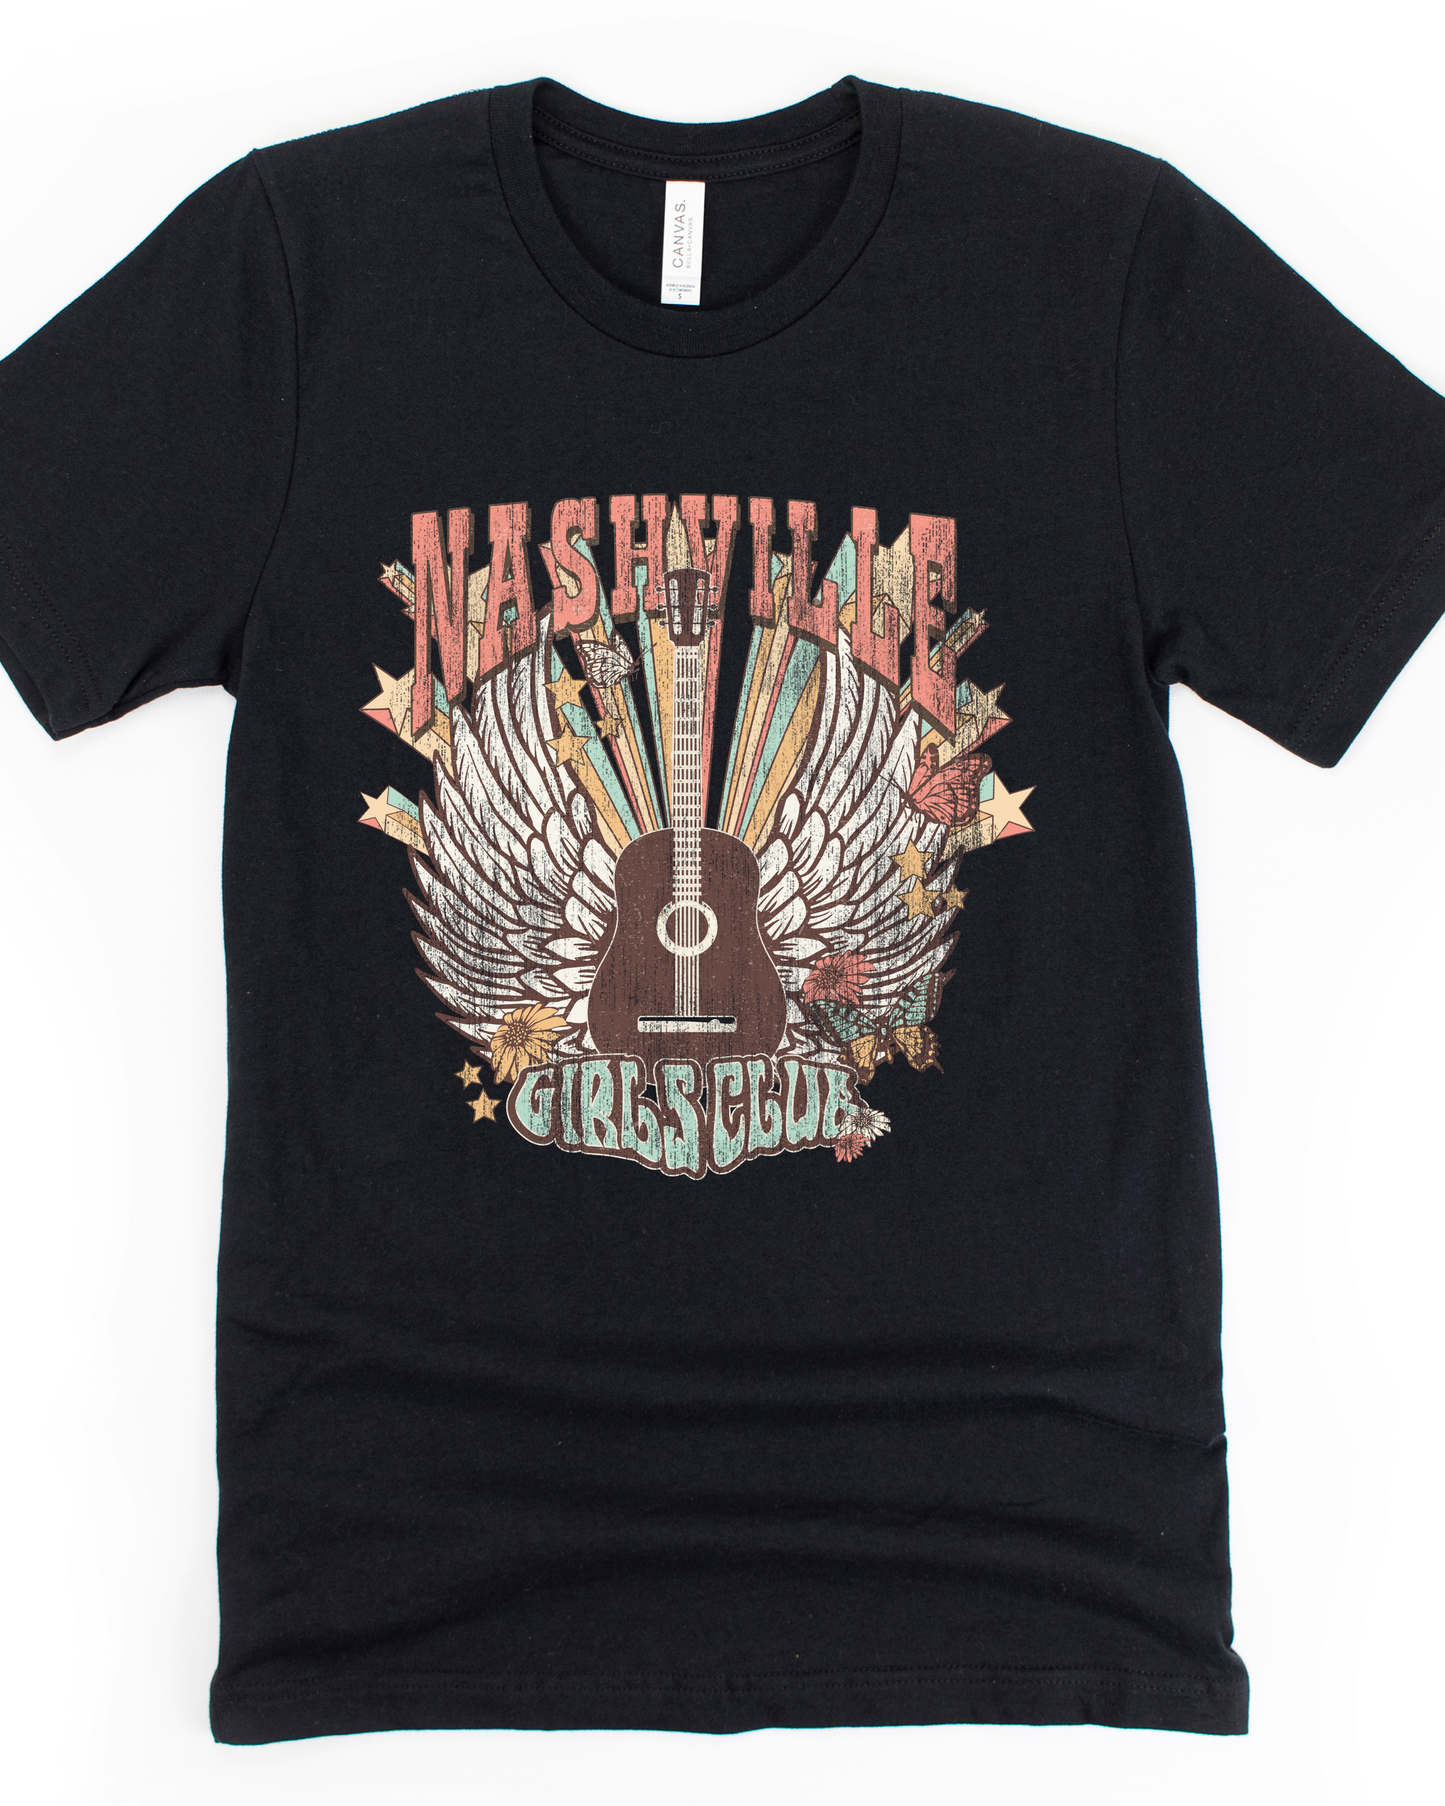 NASHVILLE GIRLS CLUB TEE(BELLA CANVAS) - Simply Polished Boutique